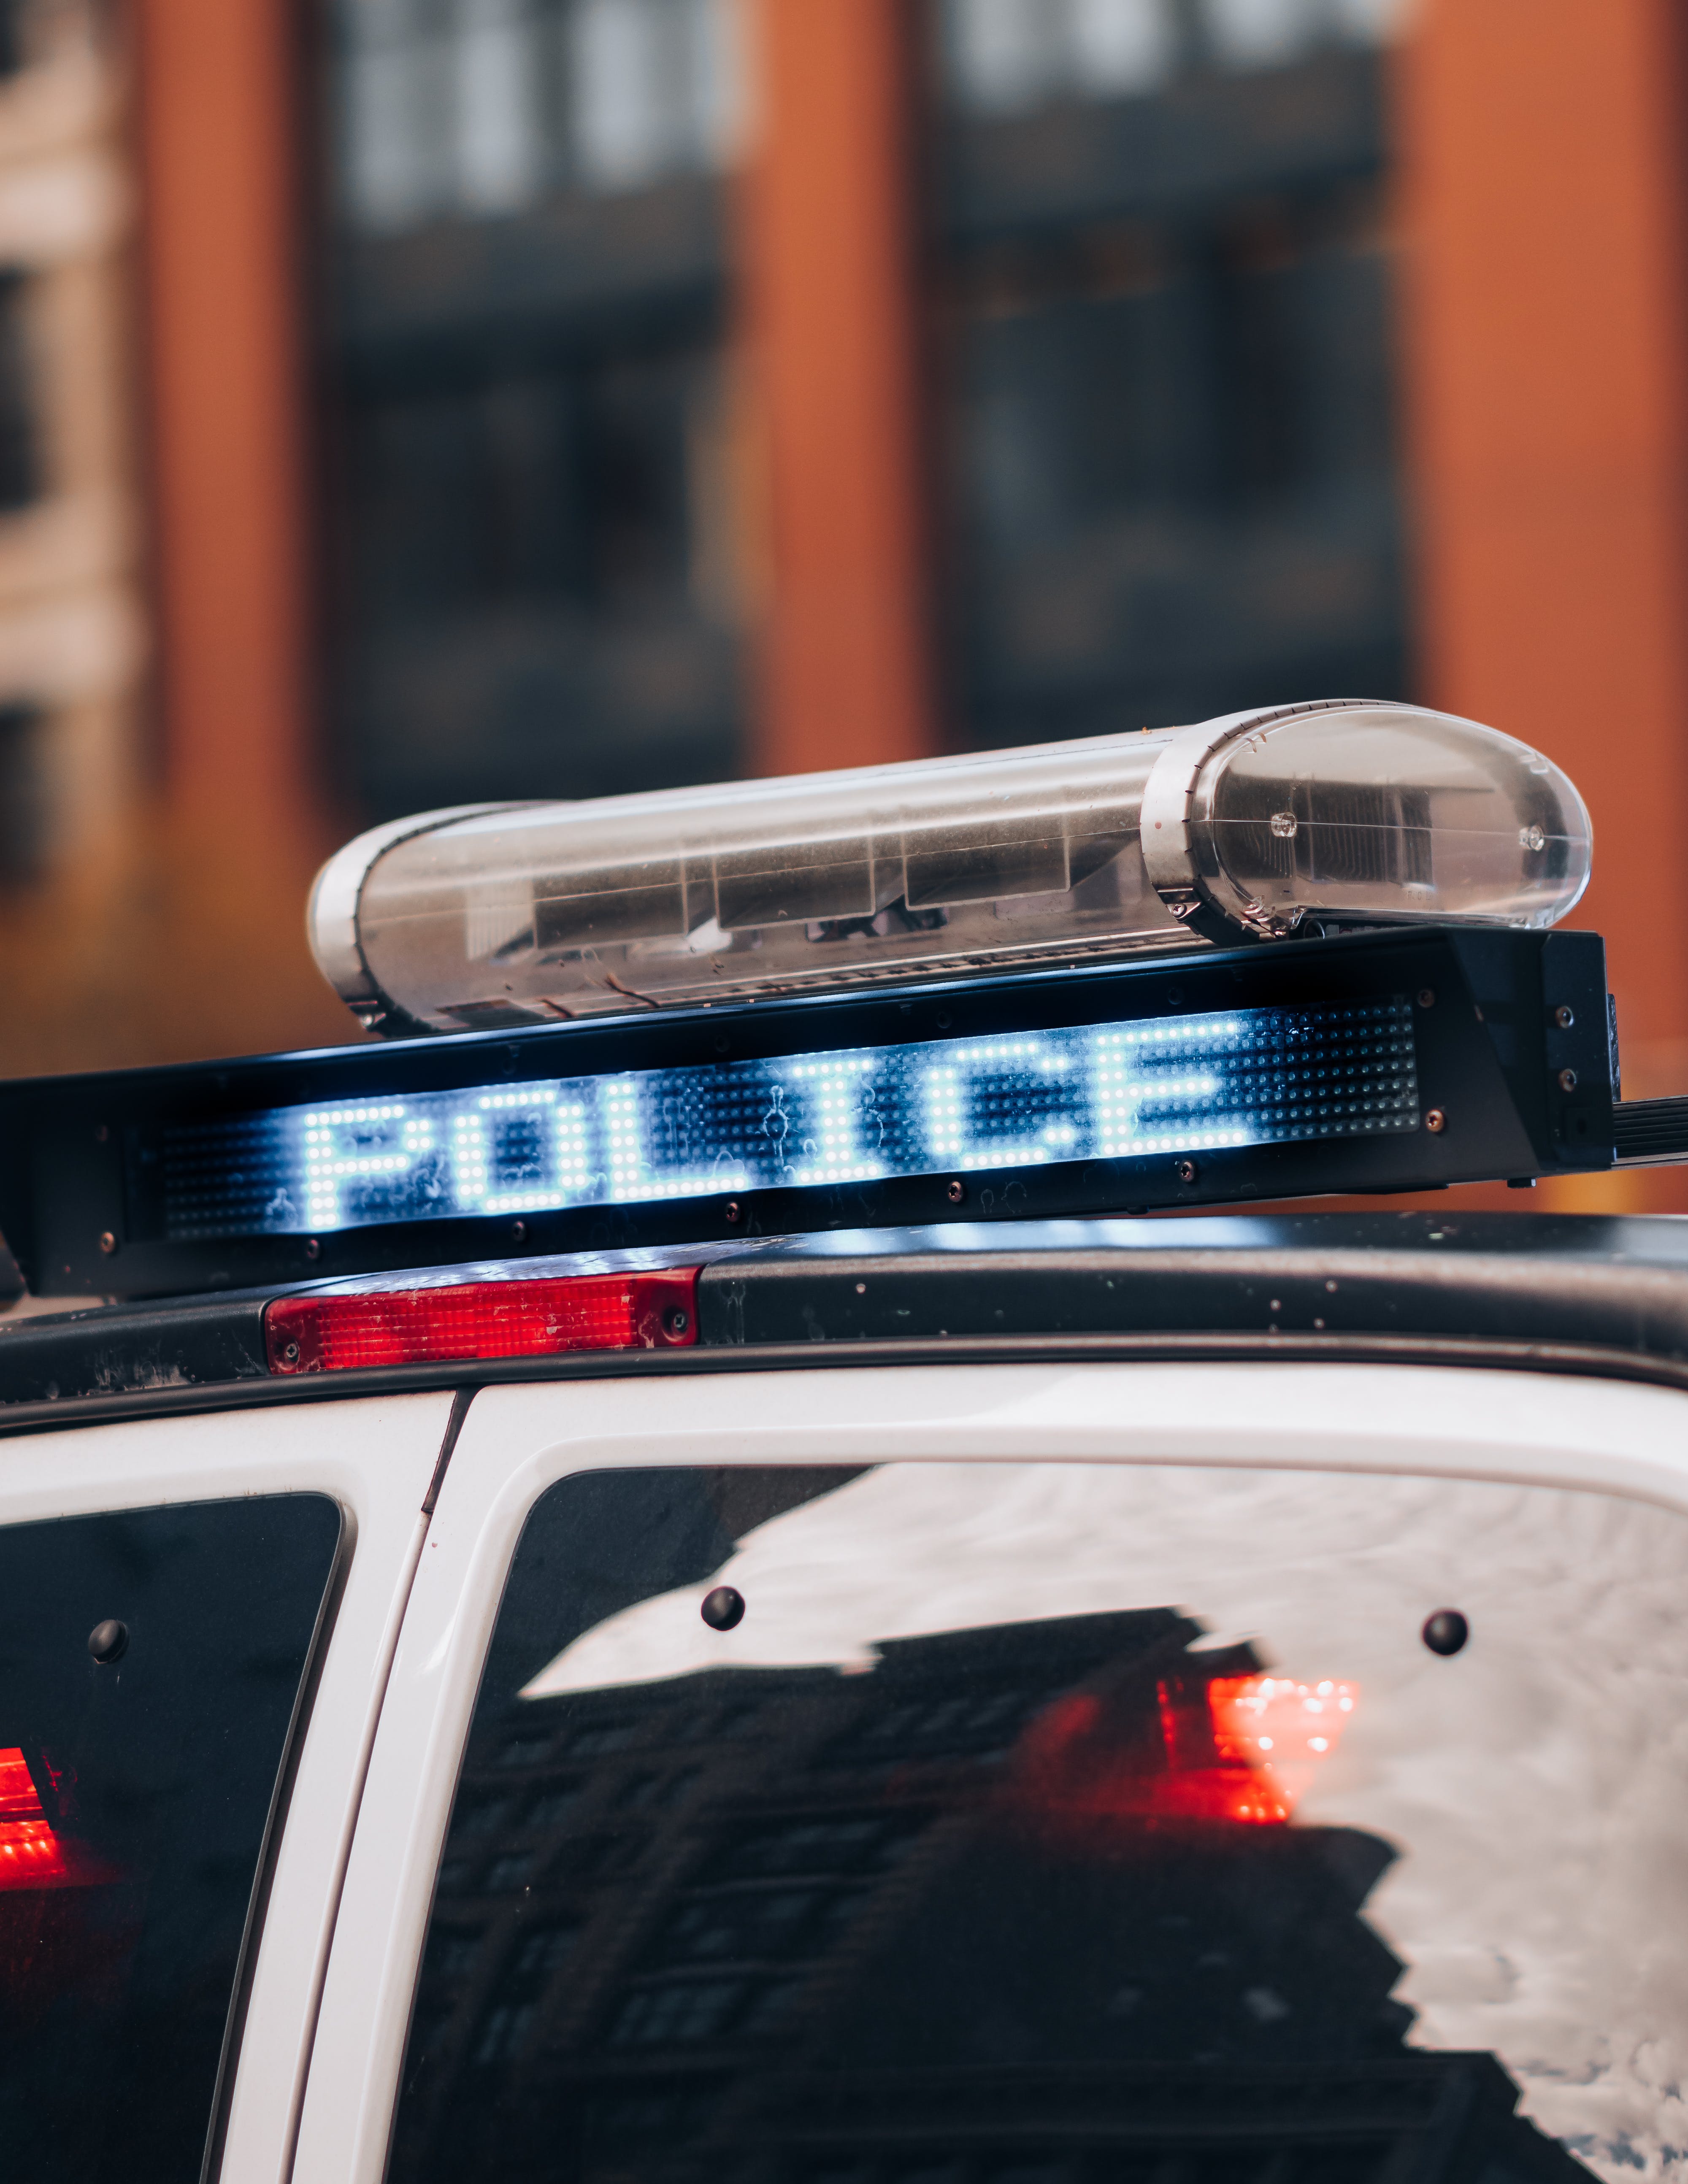 A close-up photo of a police car roof and sign | Source: Pexels